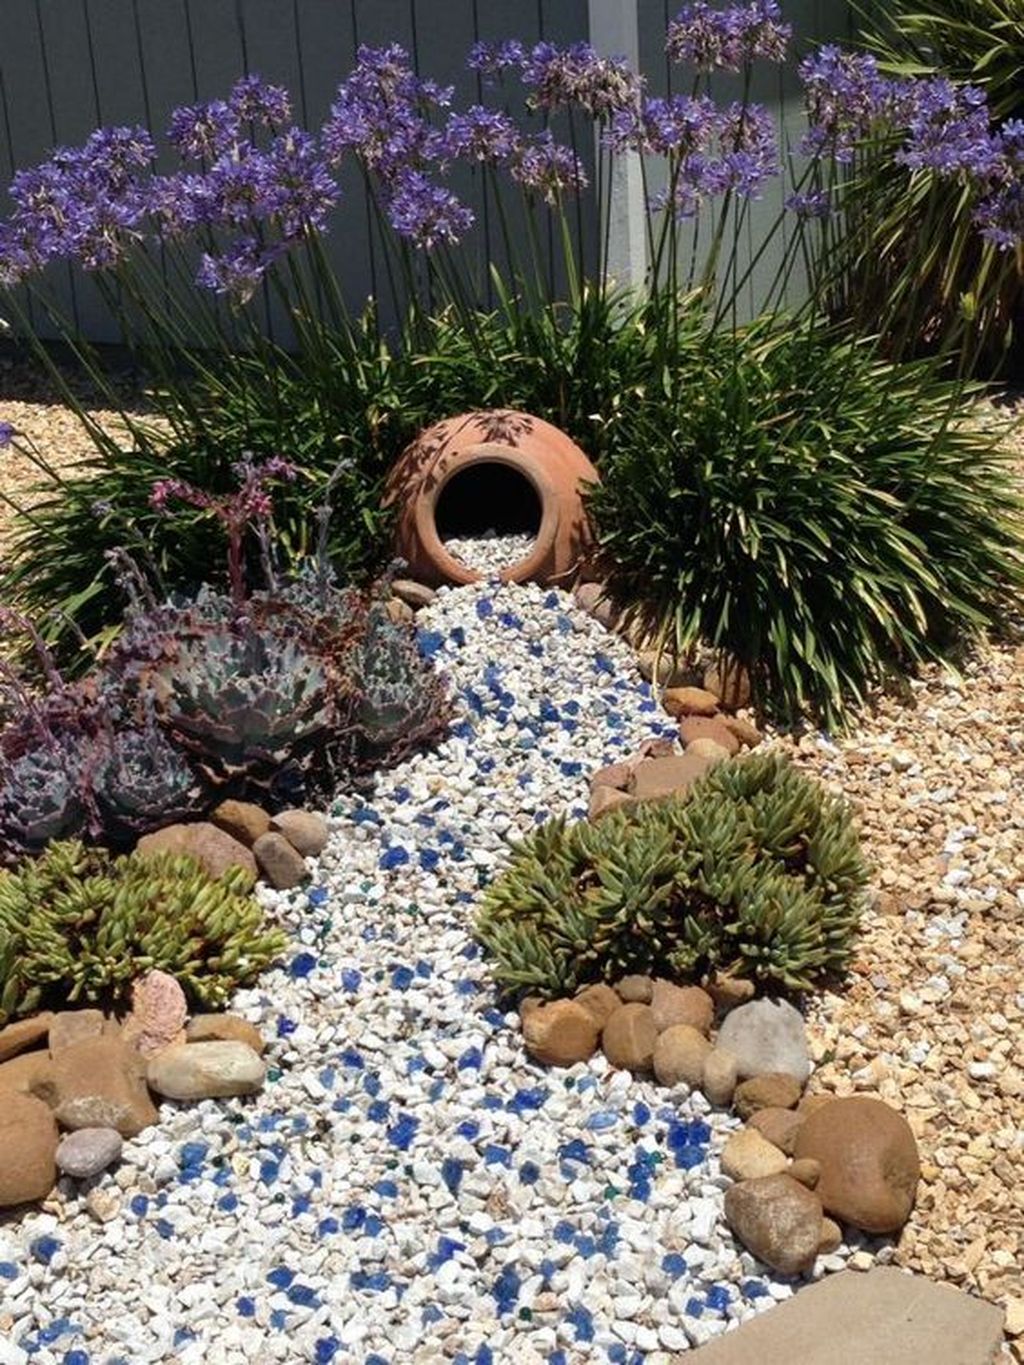 34 Awesome River Rock Landscaping Ideas - Awesome River Rock LanDscaping IDeas 29